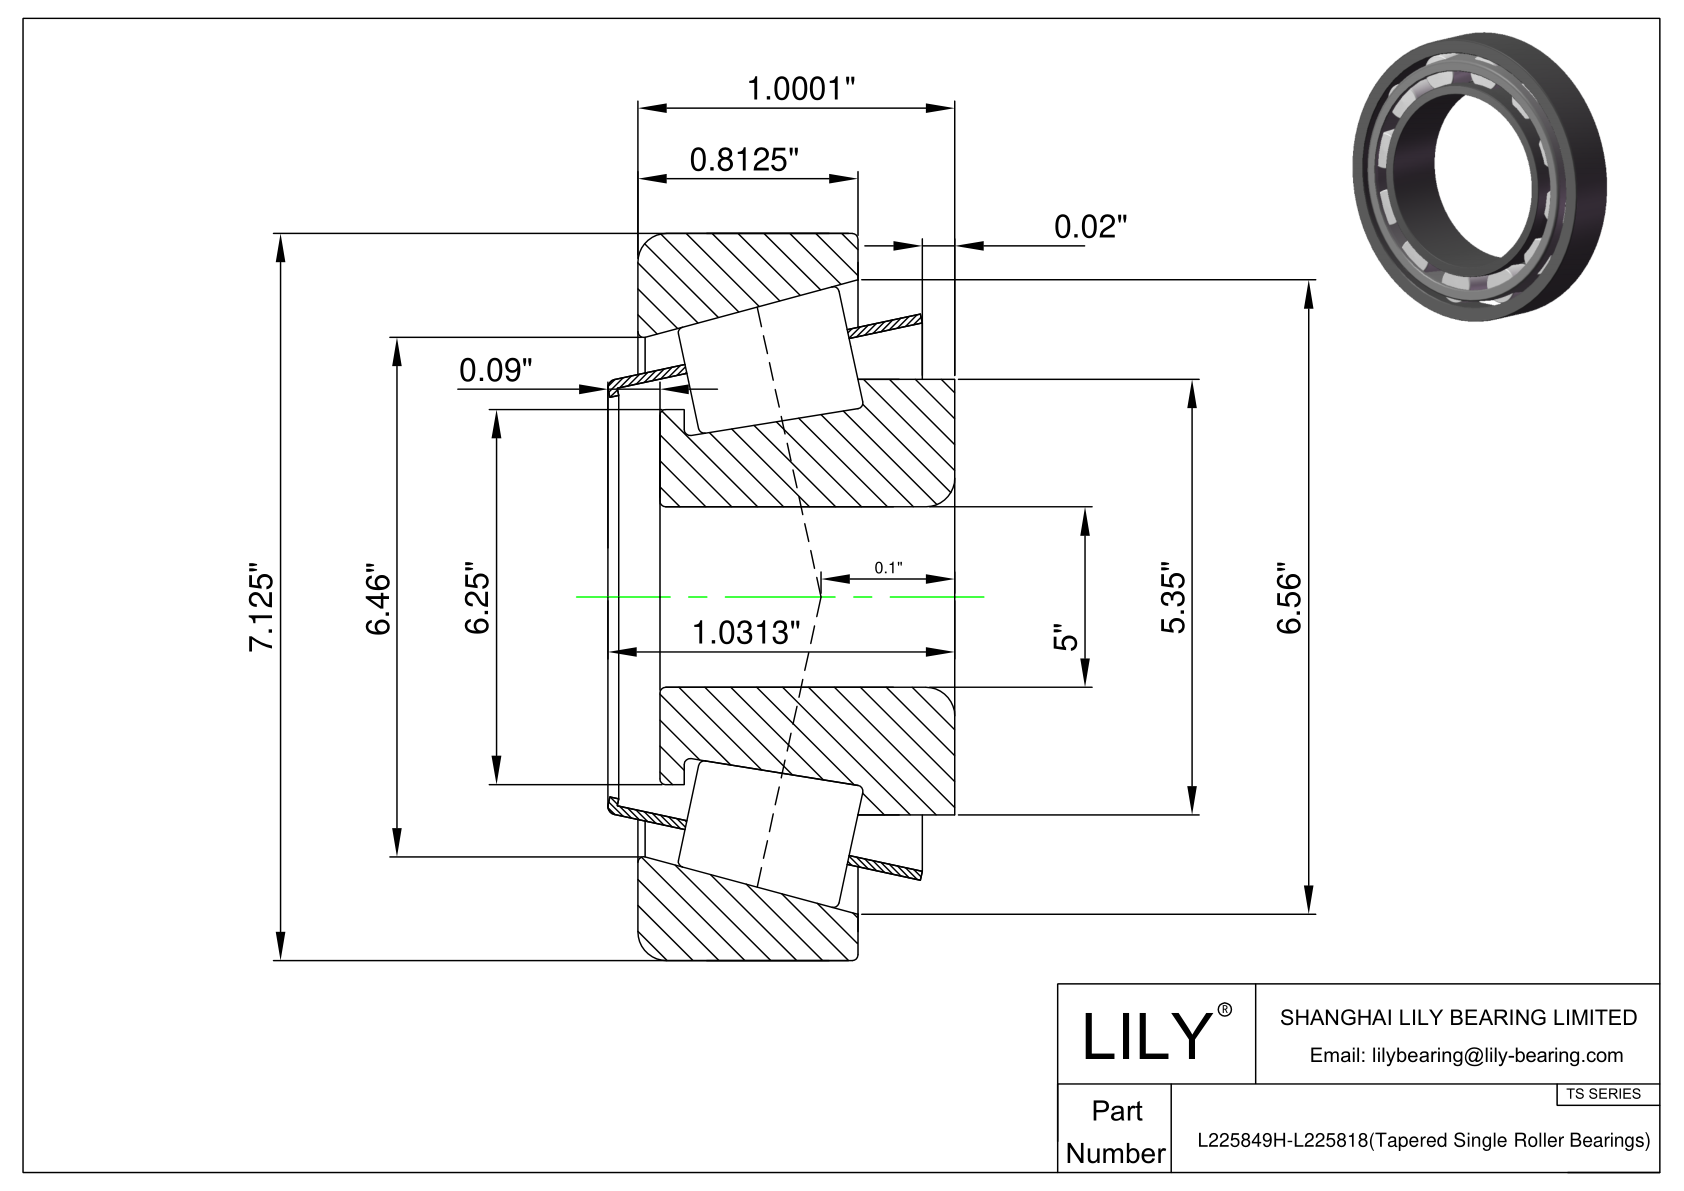 L225849H-L225818 TS (Tapered Single Roller Bearings) (Imperial) cad drawing